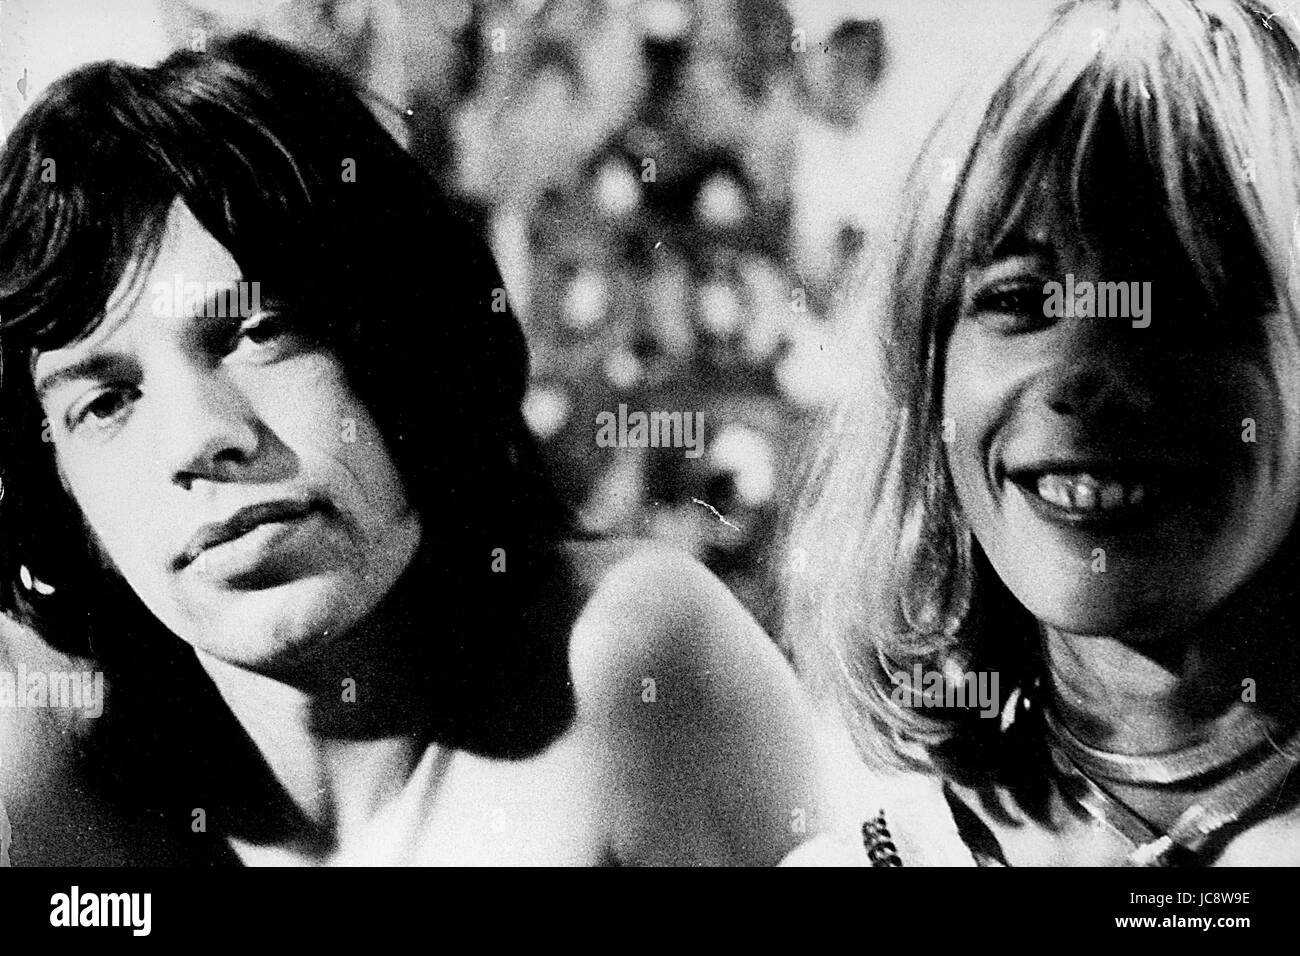 File Photo. 13th June, 2017. Italian-German actress and model ANITA PALLENBERG (born January 25, 1944 died June 13, 2017) has died at 73. A style icon and 'It Girl' of the 1960s and '70s, Pallenberg was credited as the muse of The Rolling Stones; she was the romantic partner of multi-instrumentalist and guitarist B. Jones, and later, from 1967 to 1980, the partner of Stones guitarist K. Richards, with whom she had three children. Pictured: Oct. 6, 2005 - MICK JAGGER ANITA PALLENBERG Credit: Globe Photos/ZUMAPRESS.com/Alamy Live News Stock Photo